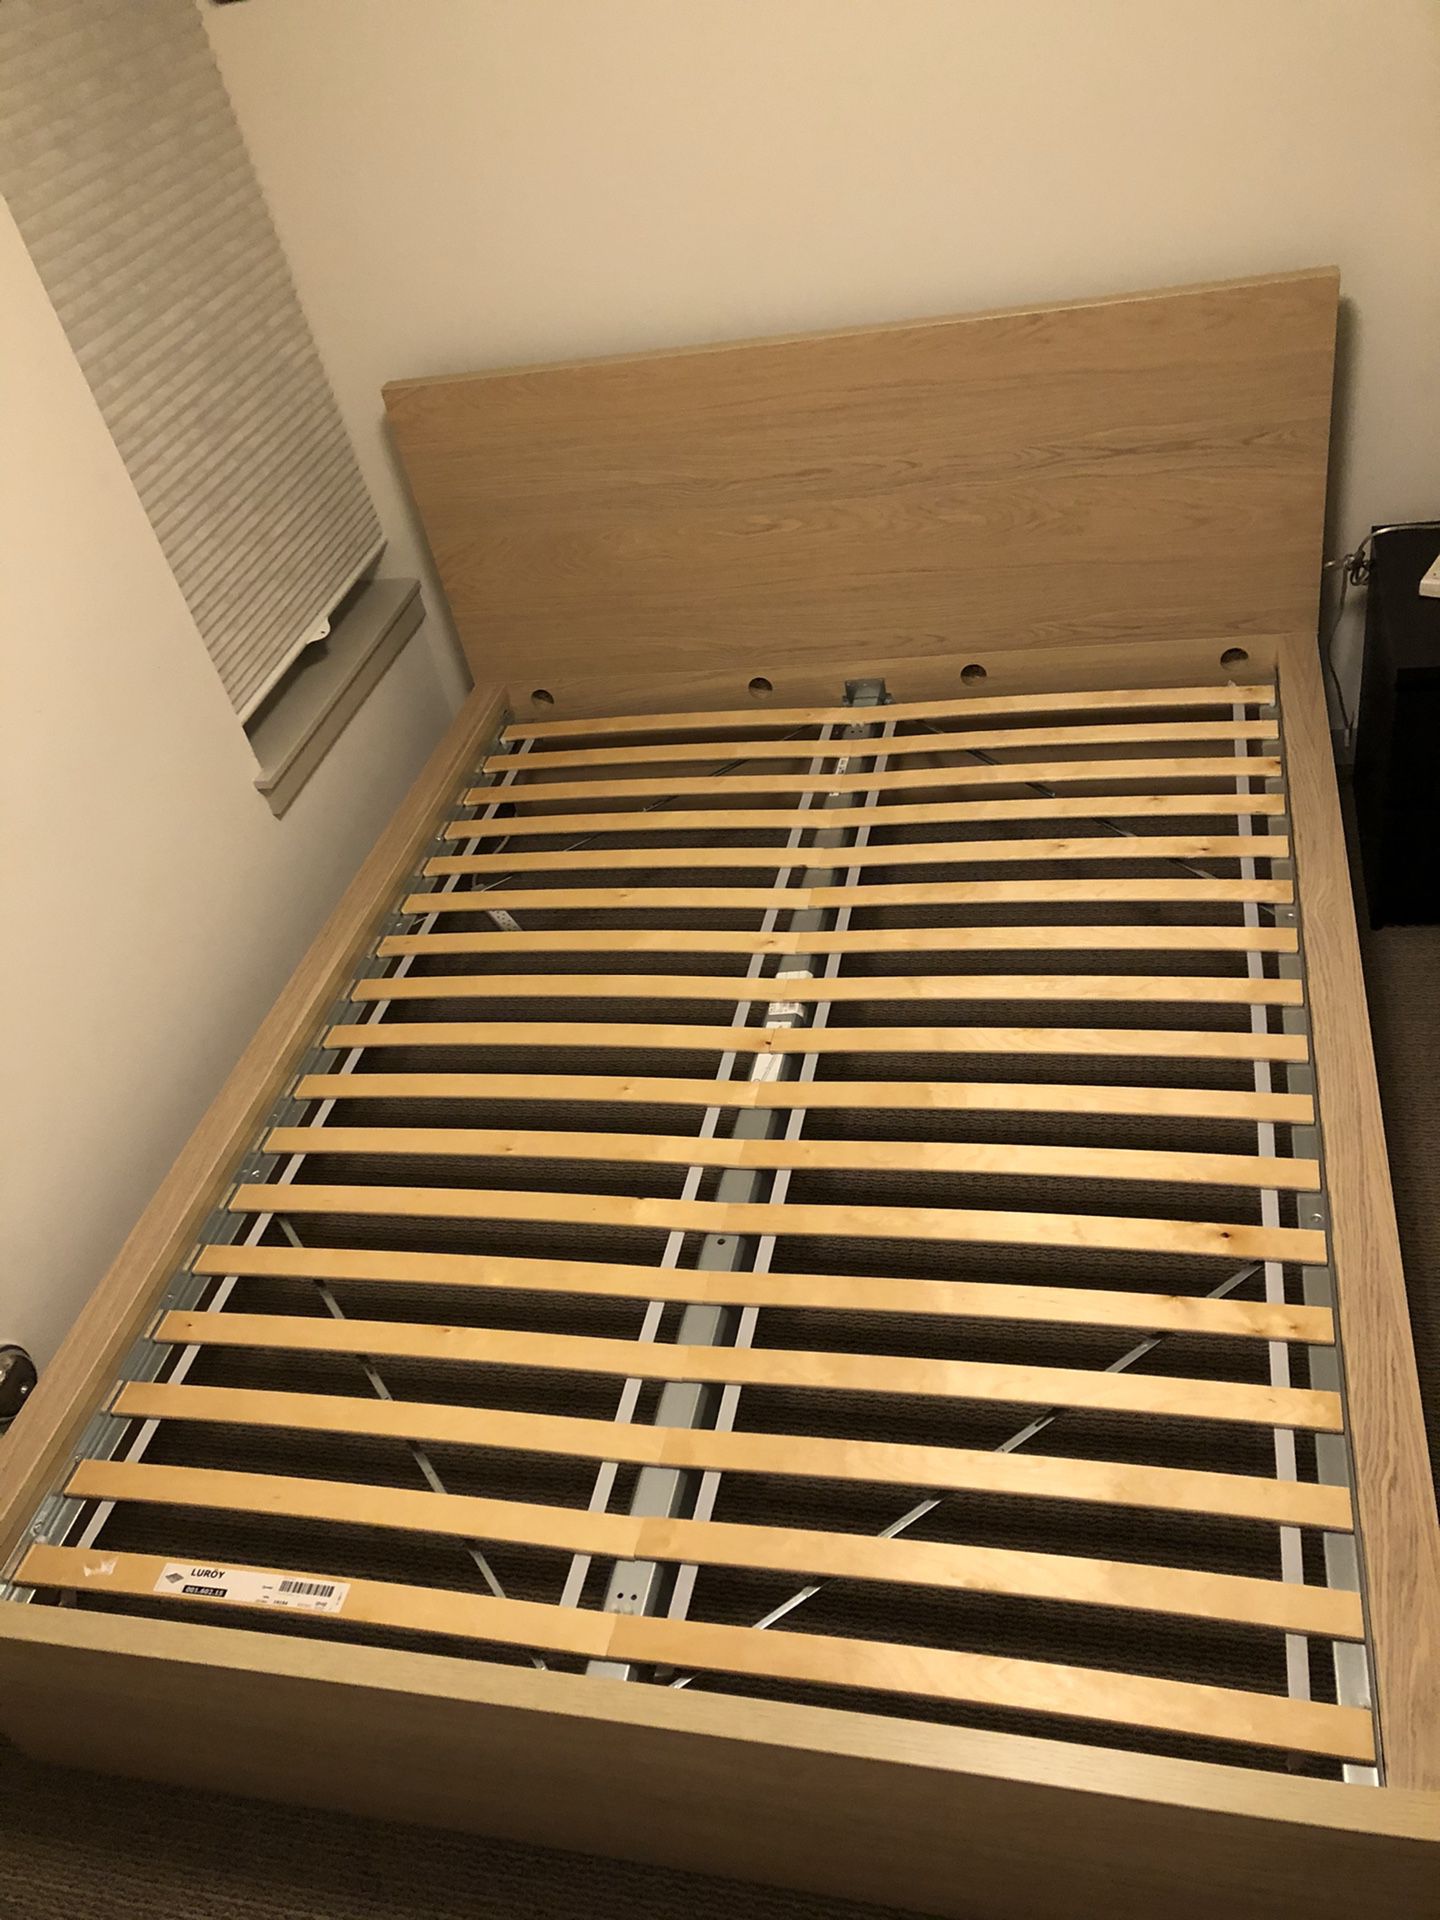 IKEA Malm Queen Bed Frame (Color: White Stained Oak Veneer)